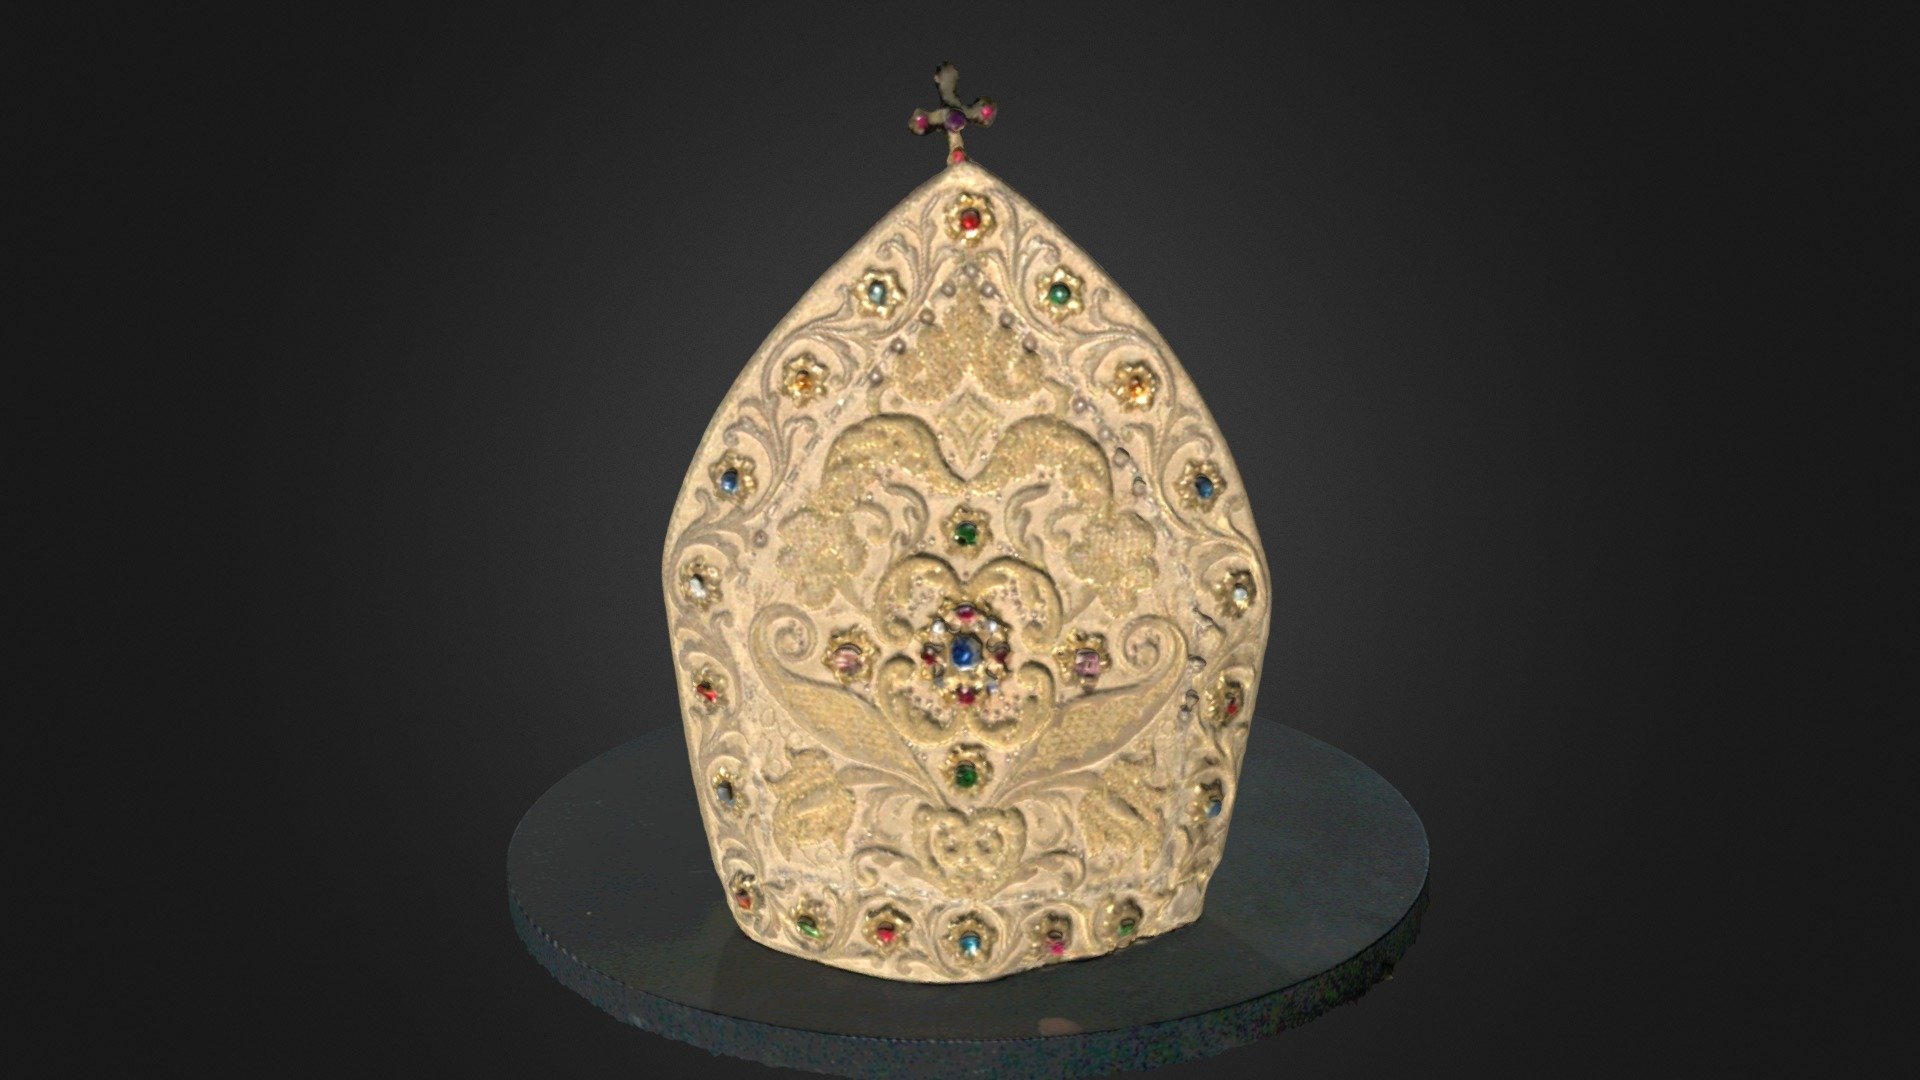 A mitre is a bishop or abbot’s distinctive ceremonial head-dress. This mitre is hand embroidered and is set with semi-precious and non-precious stones.  This mitre came from St James Abbey, Ratisbon (now Regensburg), Germany.
After the abbey closed, the mitre went with the last of the Scottish monks to the new abbey they founded at Fort Augustus in 1862.  This object belongs to the Scottish Catholic Heritage Collections Trust, T6227aBLRBM - Ratisbon Mitre, Blairs Museum, Aberdeen - 3D model by orbitalscot 3d model